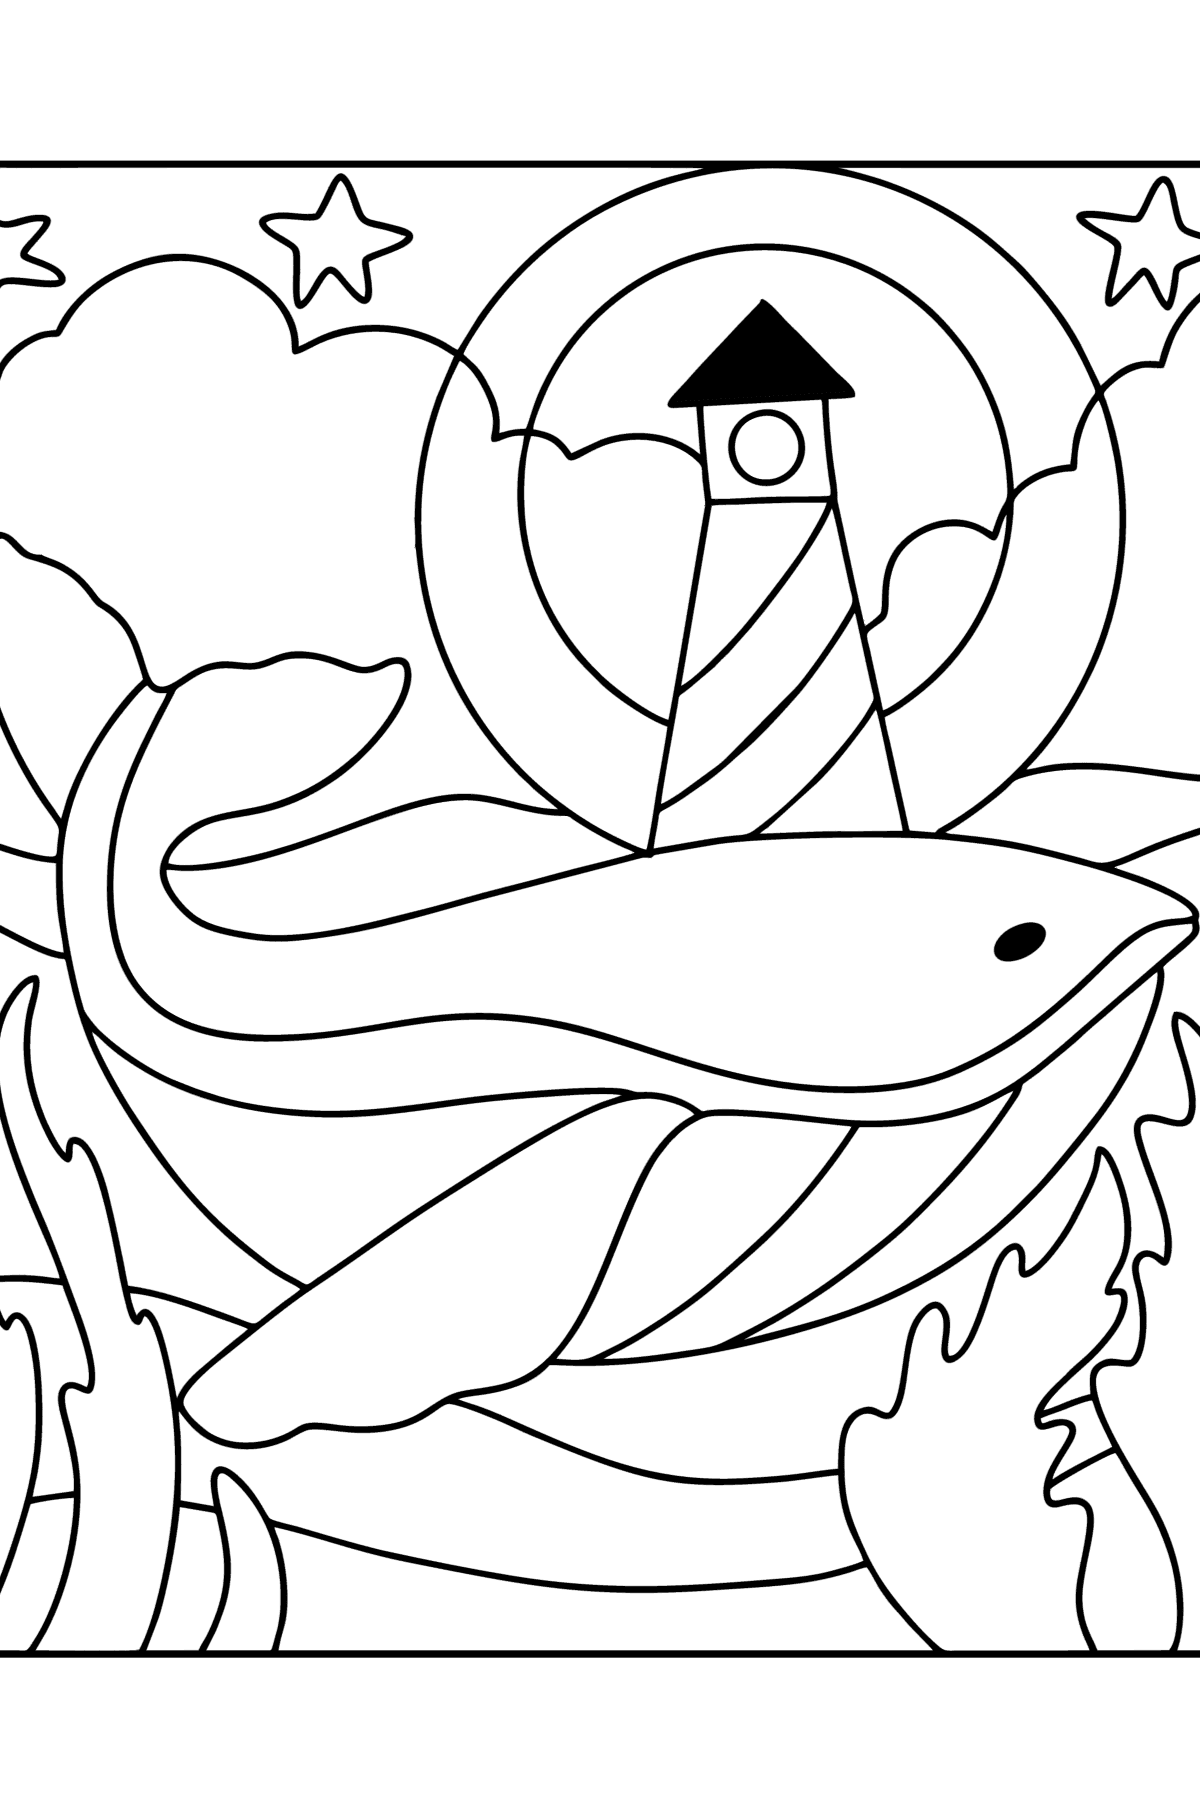 Whale with lighthouse coloring page - Coloring Pages for Kids